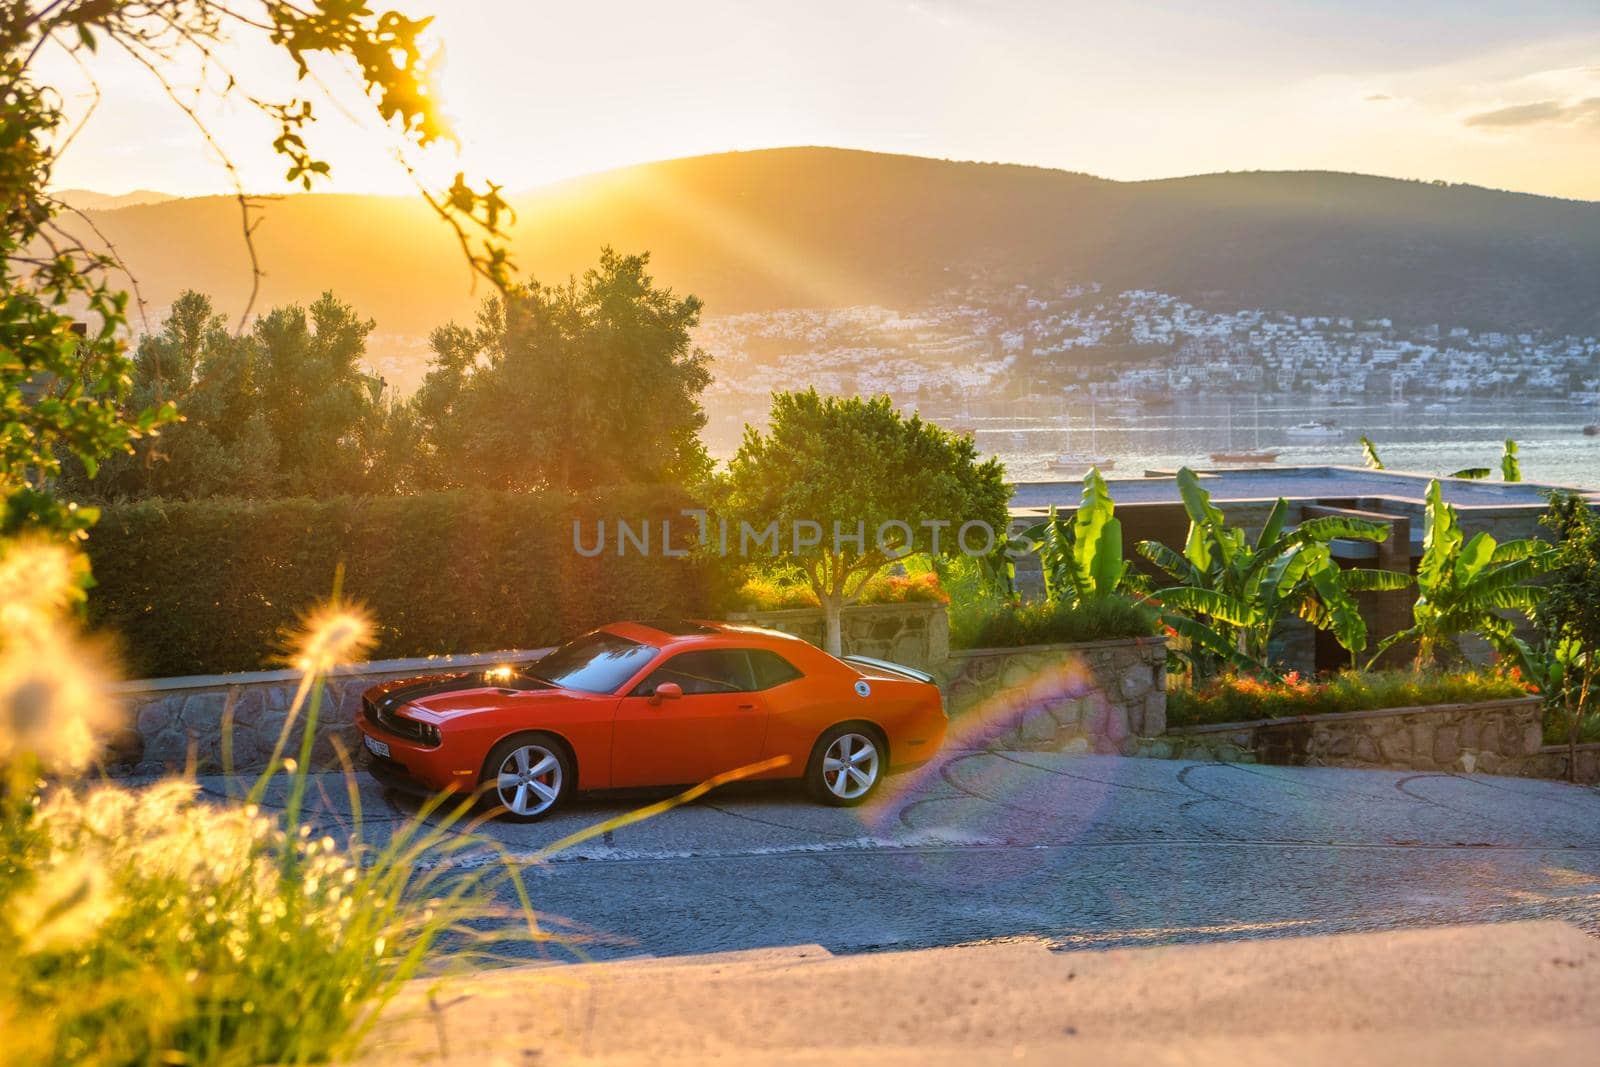 Vintage Sport car parked on road side with golden sunset and mountains on background. car on the road